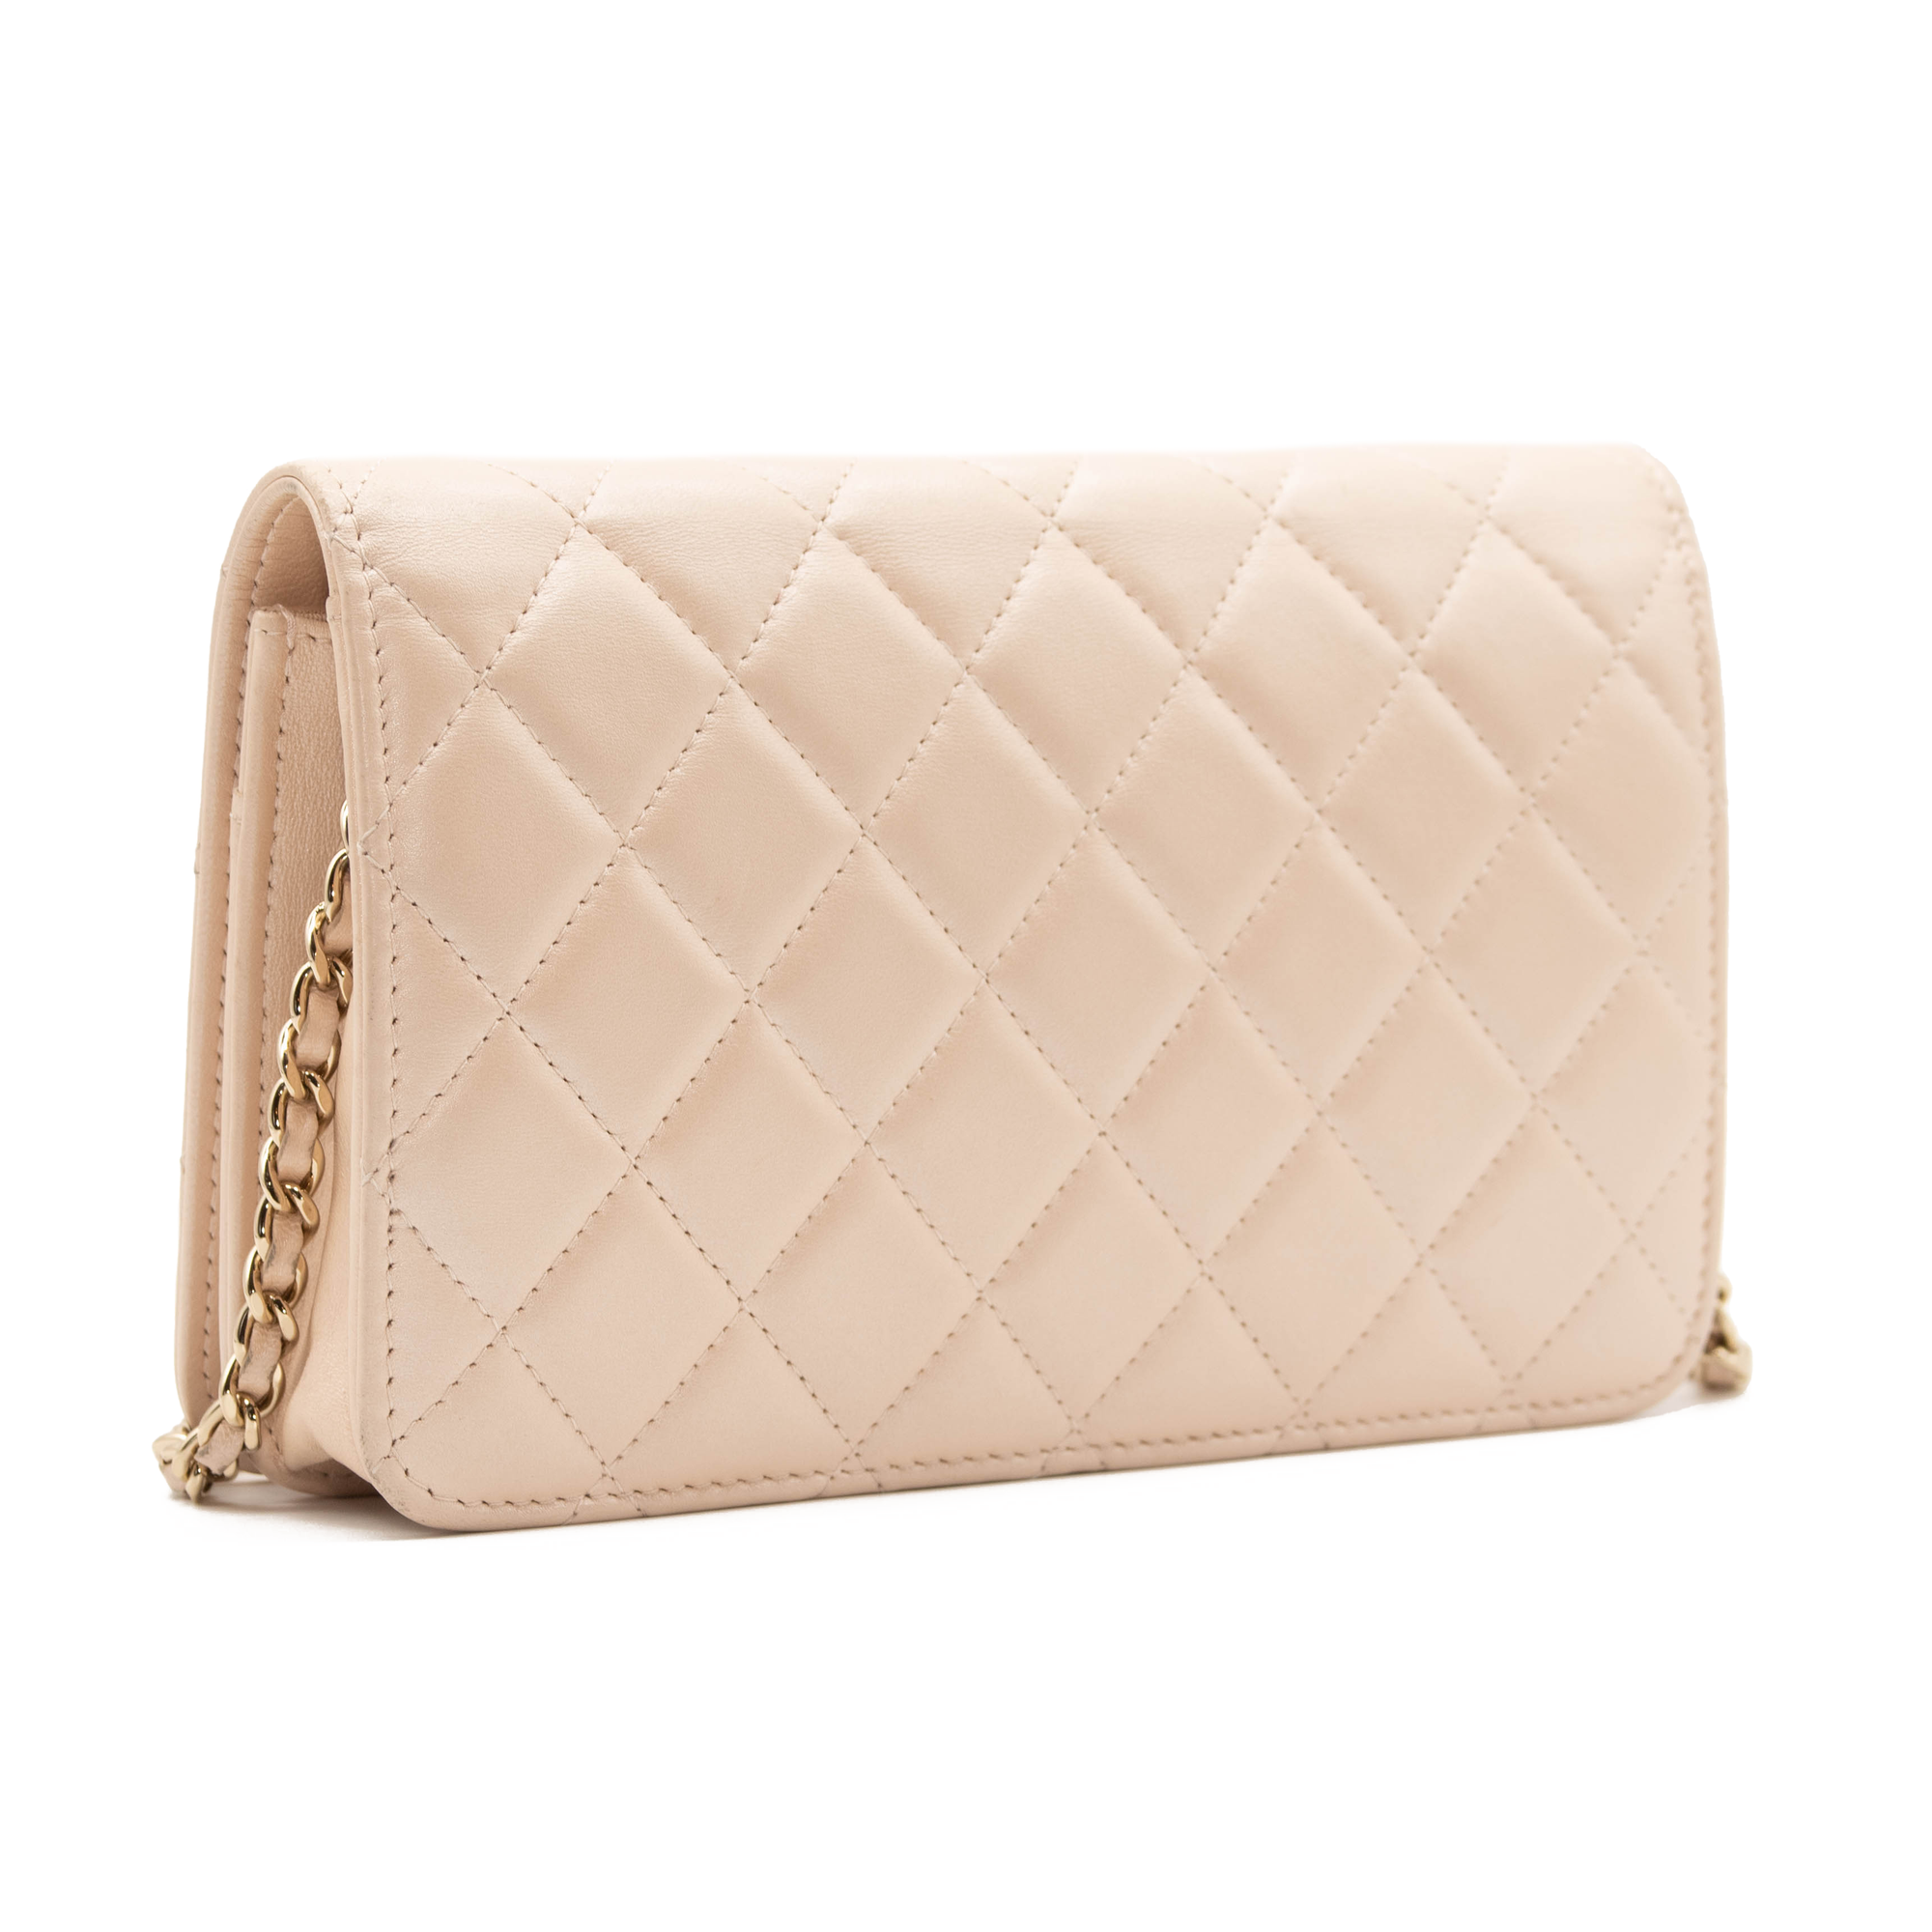 Chanel Pink Iridescent Lambskin Thick Chain Wallet on Chain